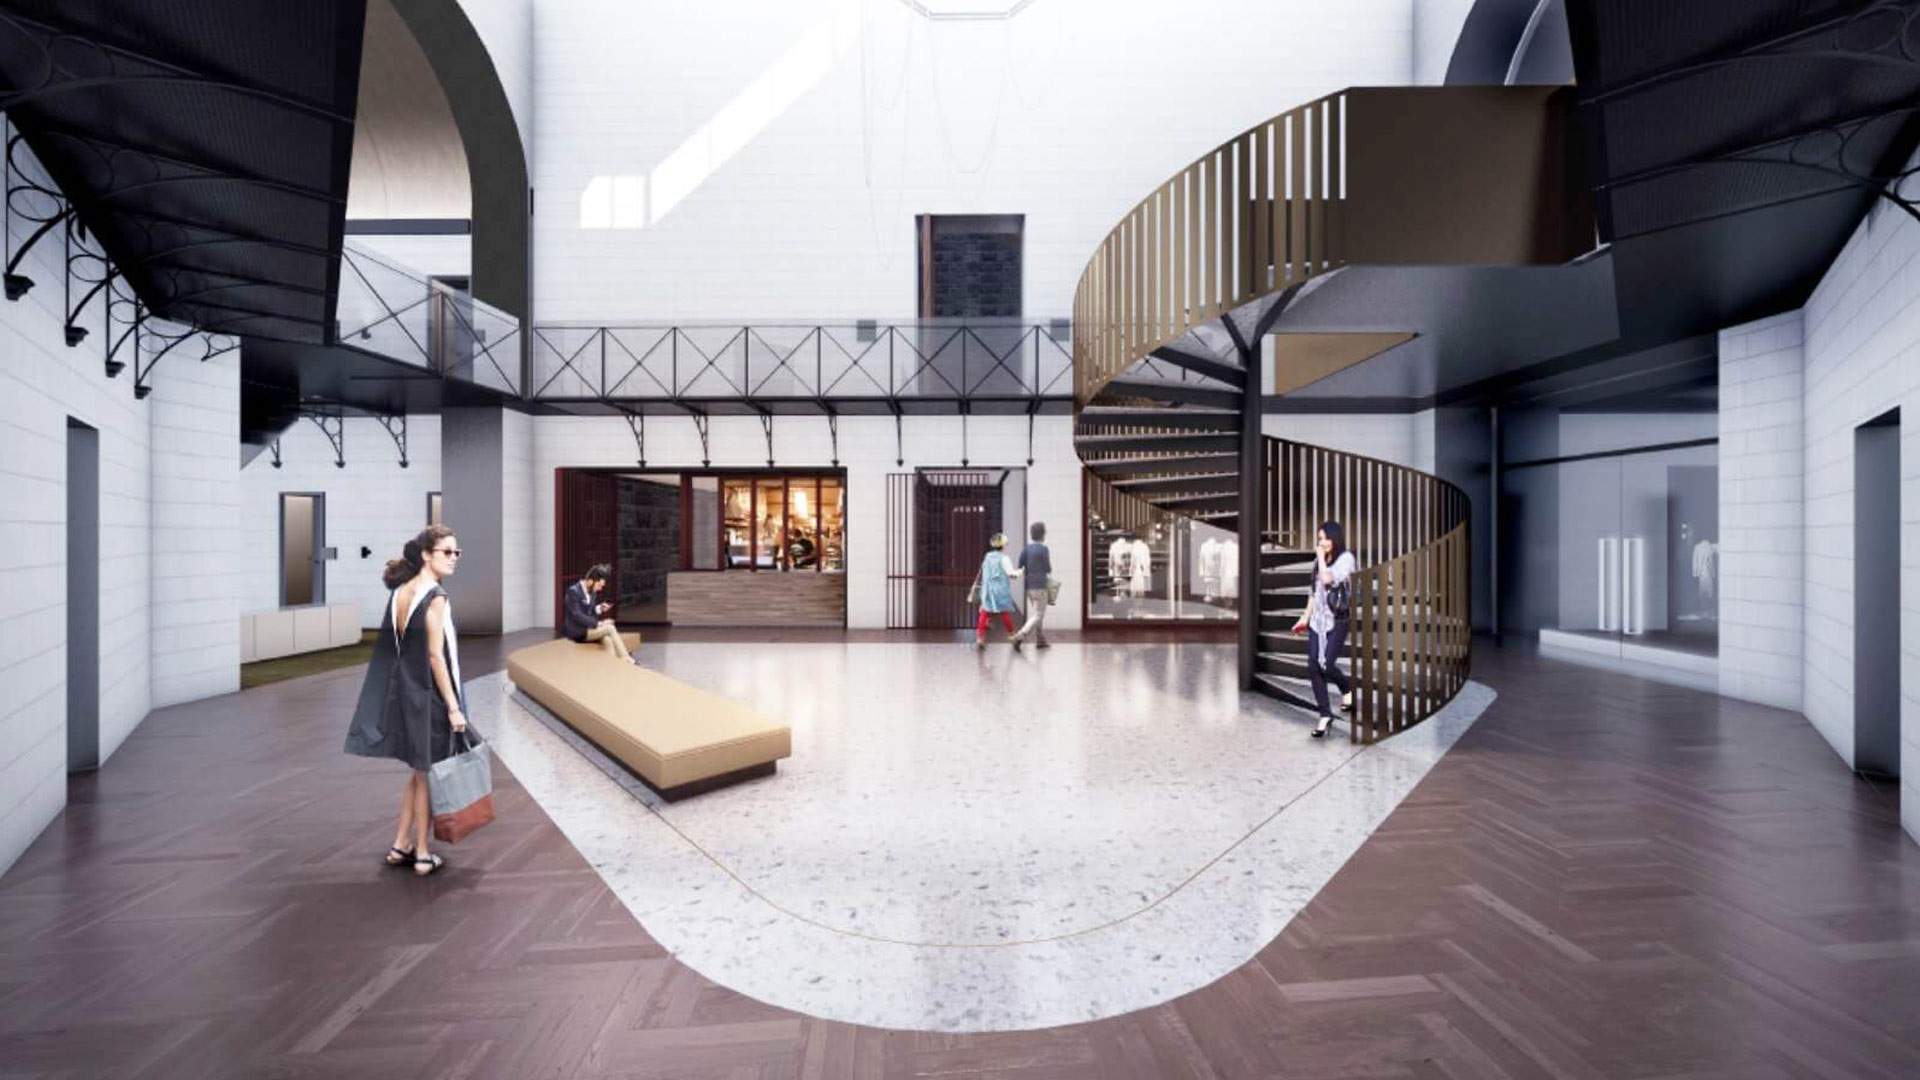 The Pentridge Prison Site Will Soon Be Home to a 120-Suite Hotel